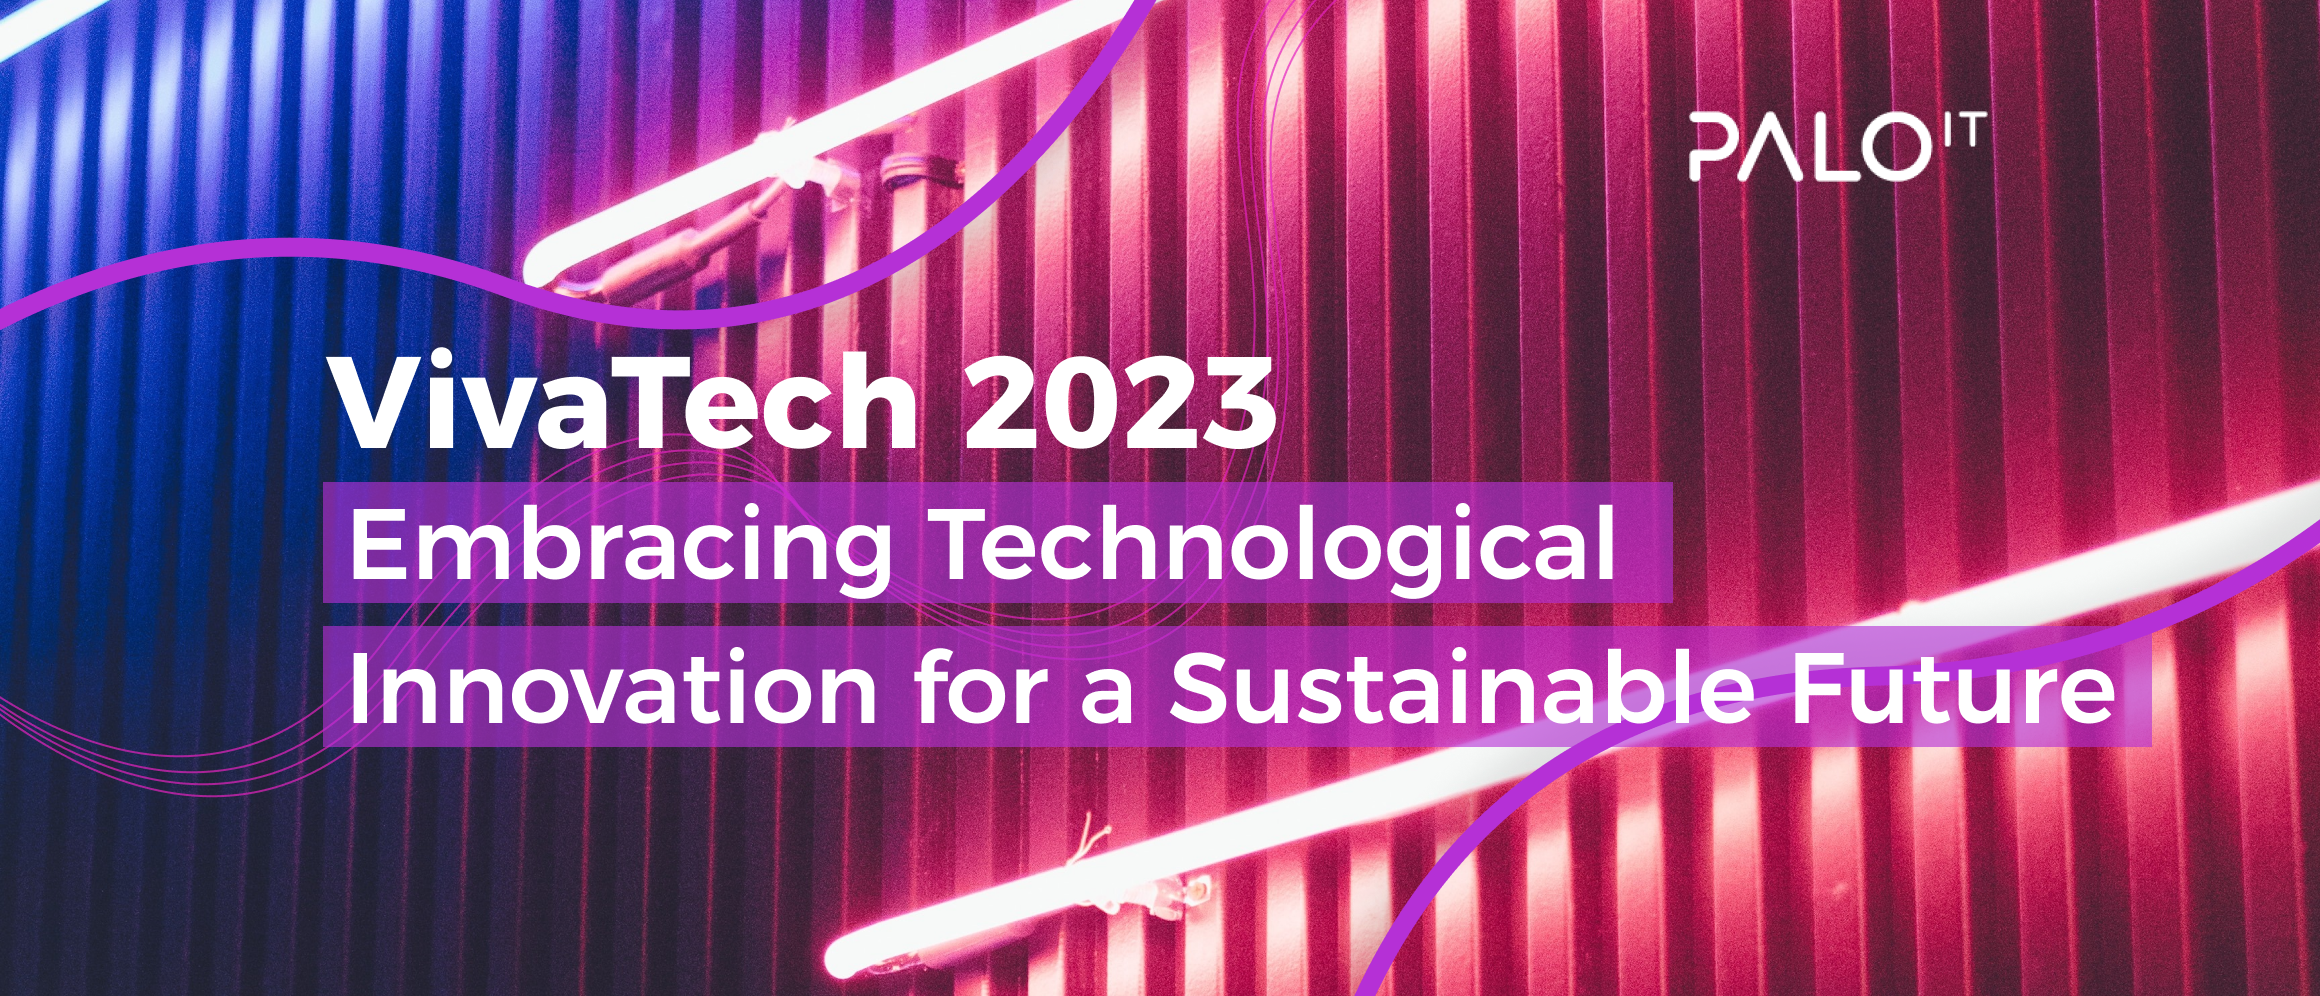 Embracing Technological Innovation for a Sustainable Future: Highlights from VivaTech 2023